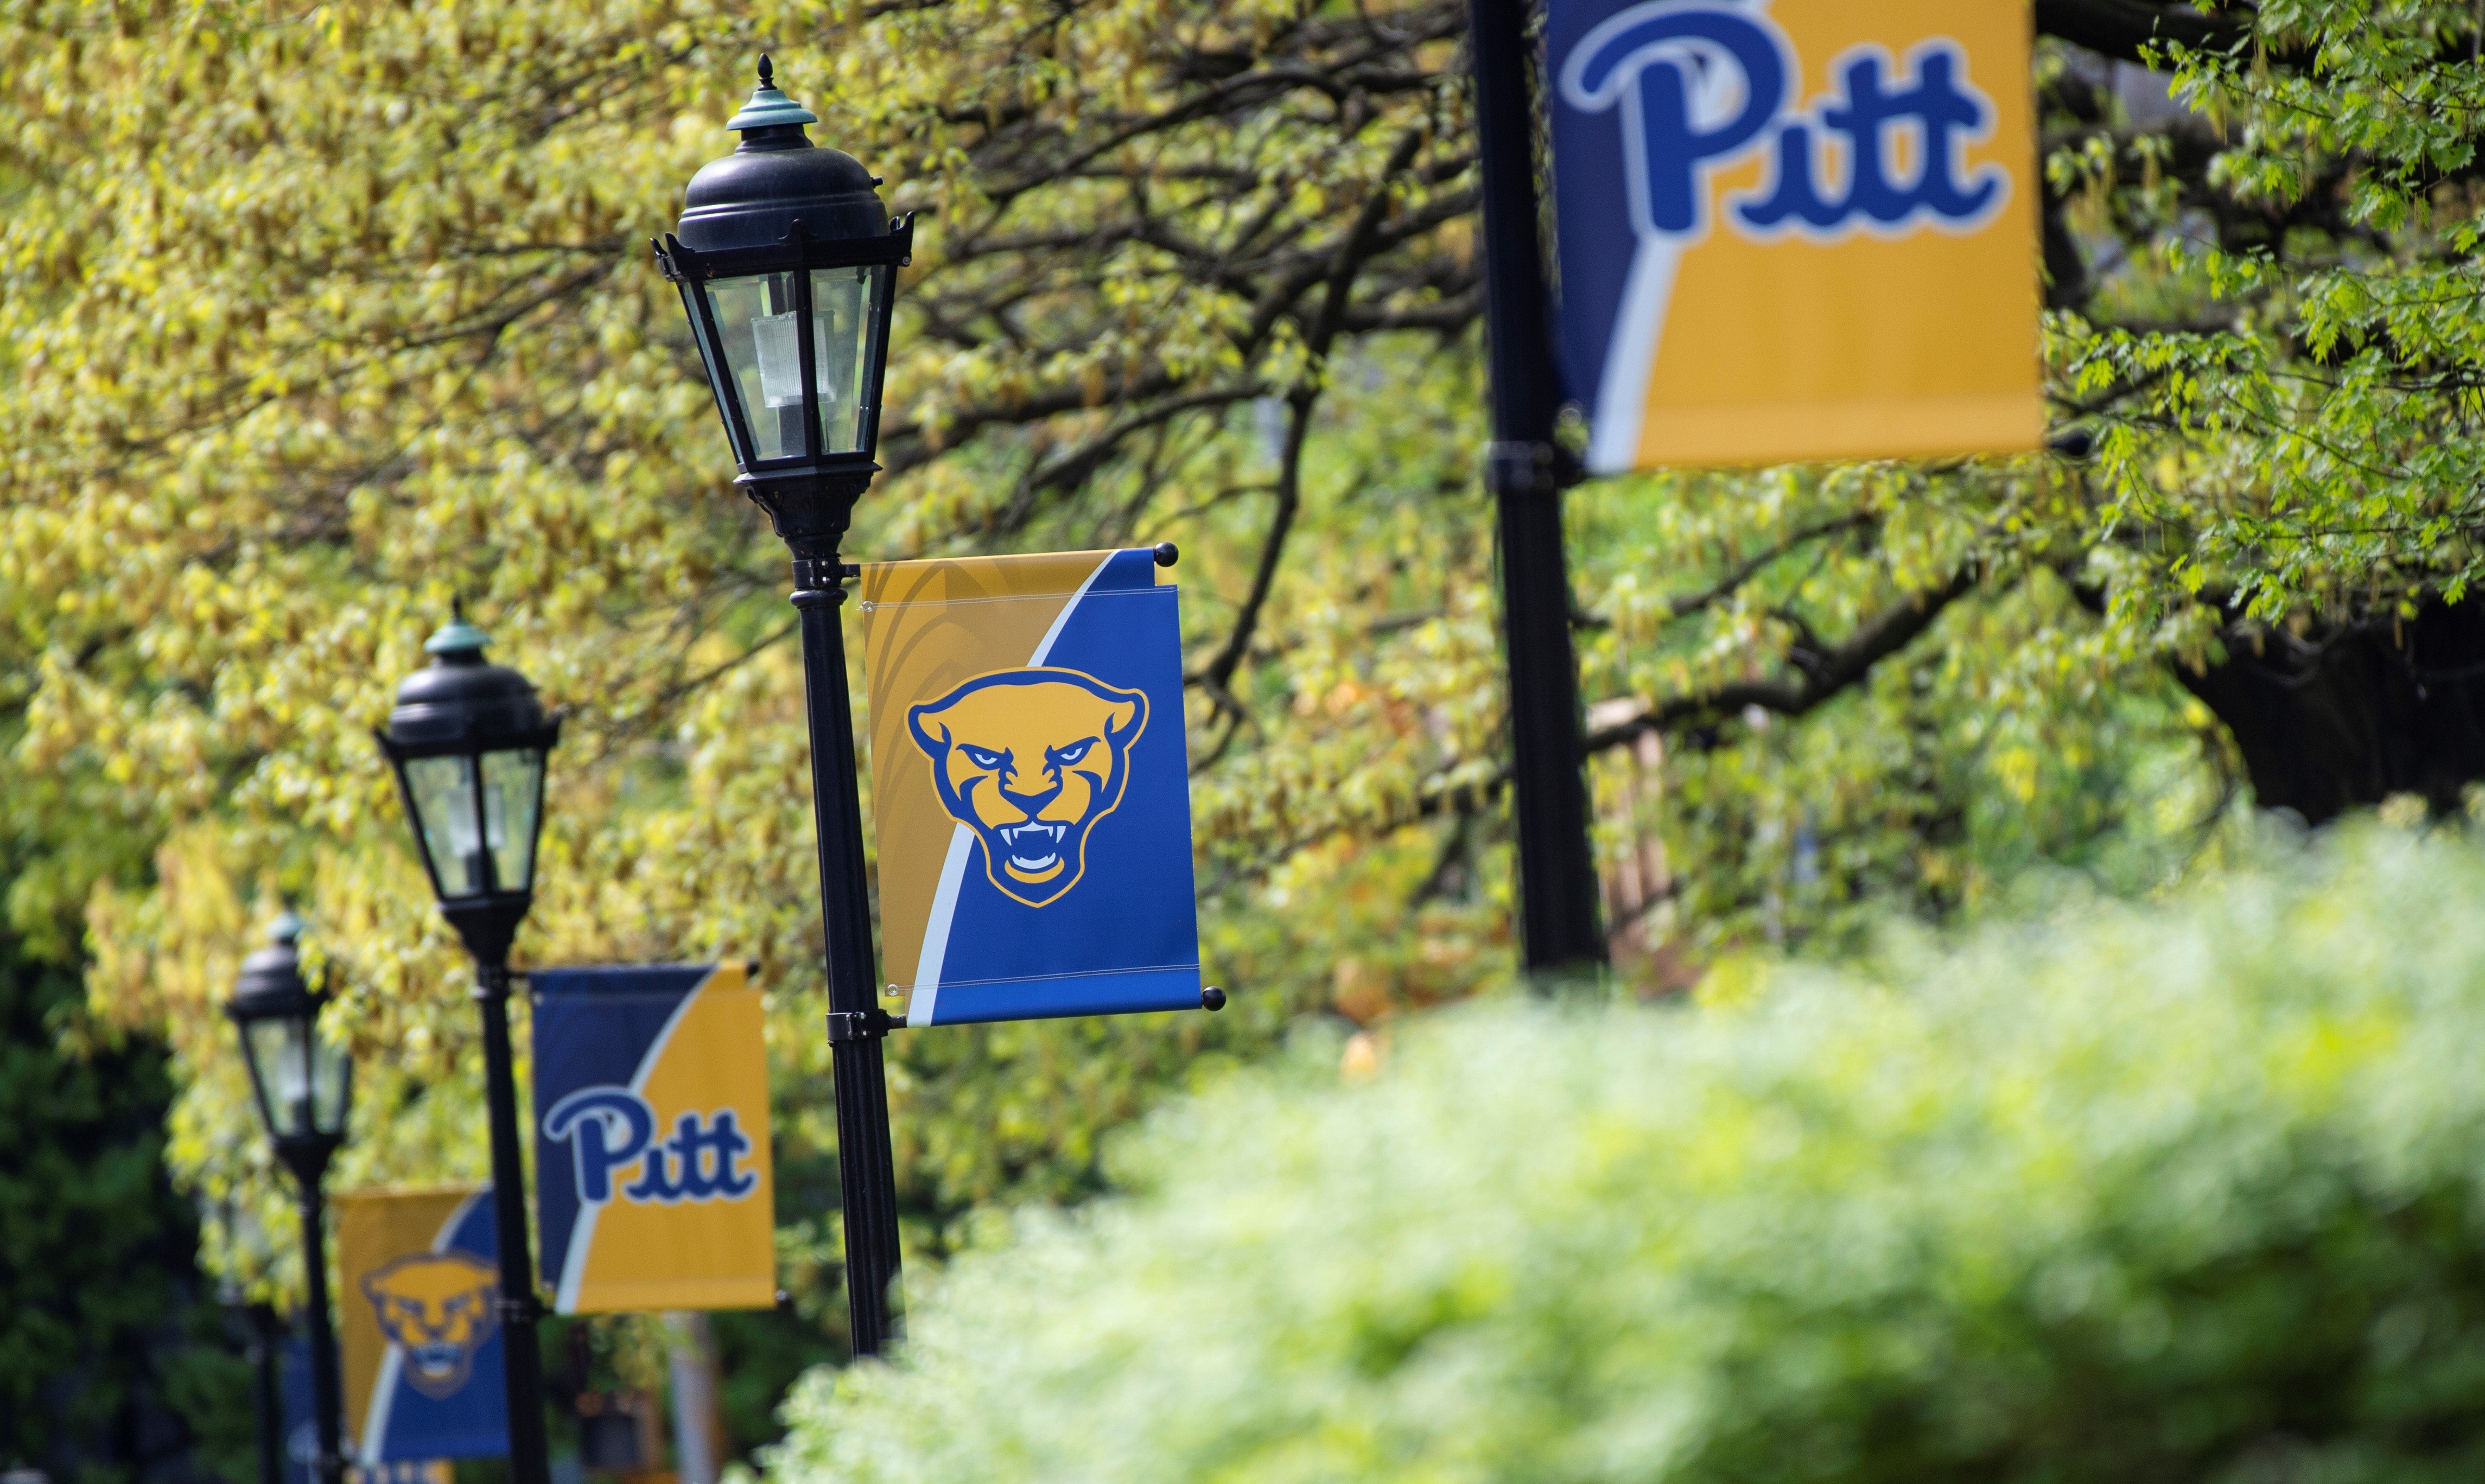 Welcome to Pitt banner image